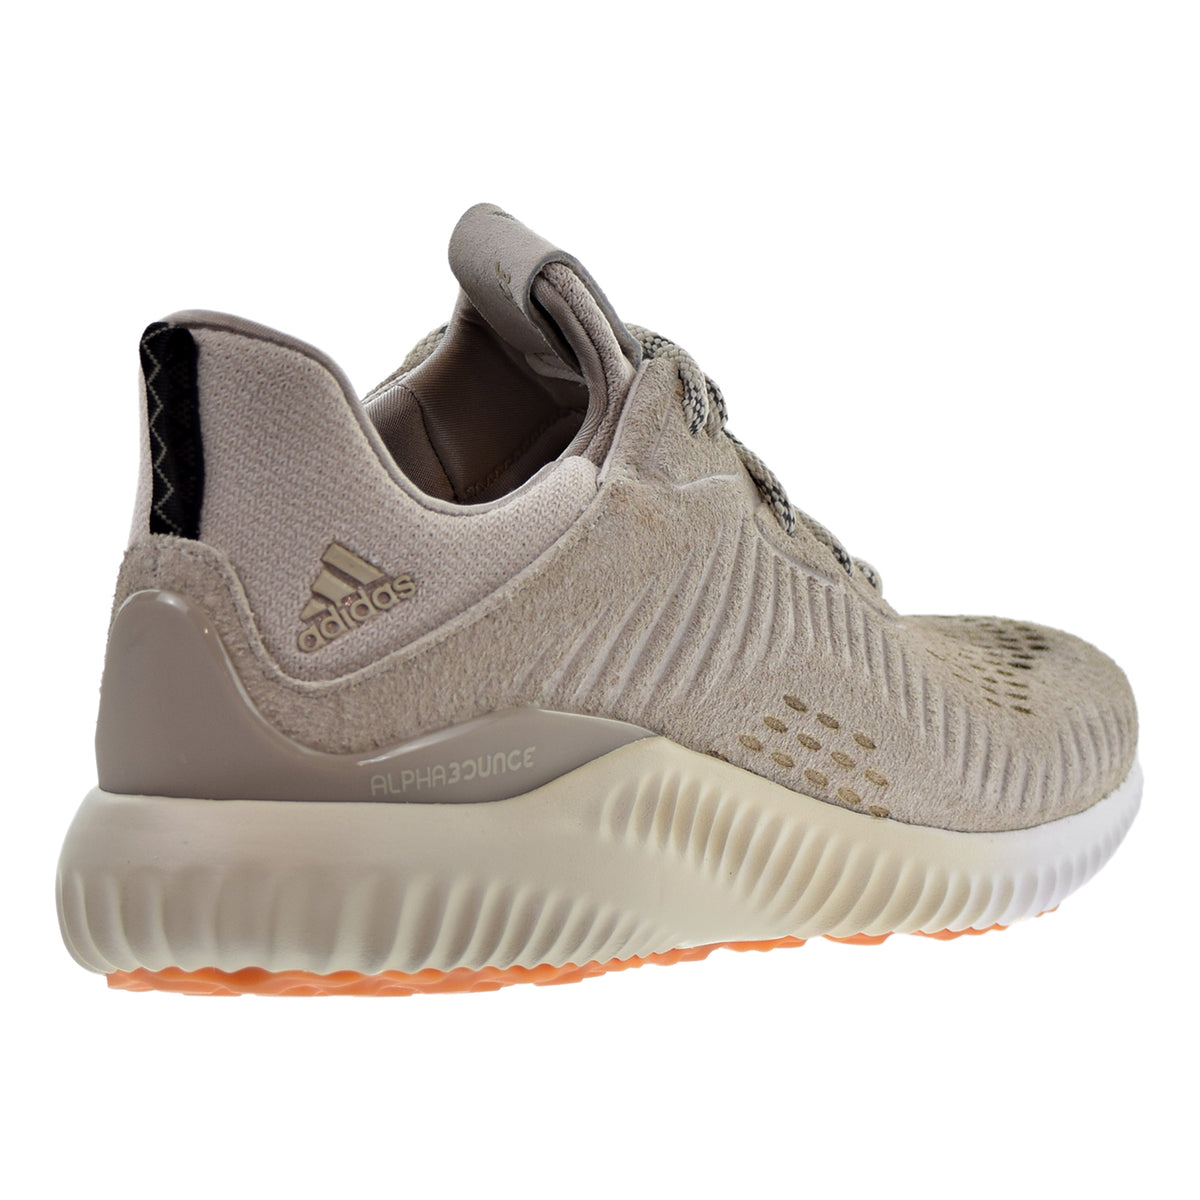 Adidas AlphaBounce LEA Men's Shoes Clear Brown/Running